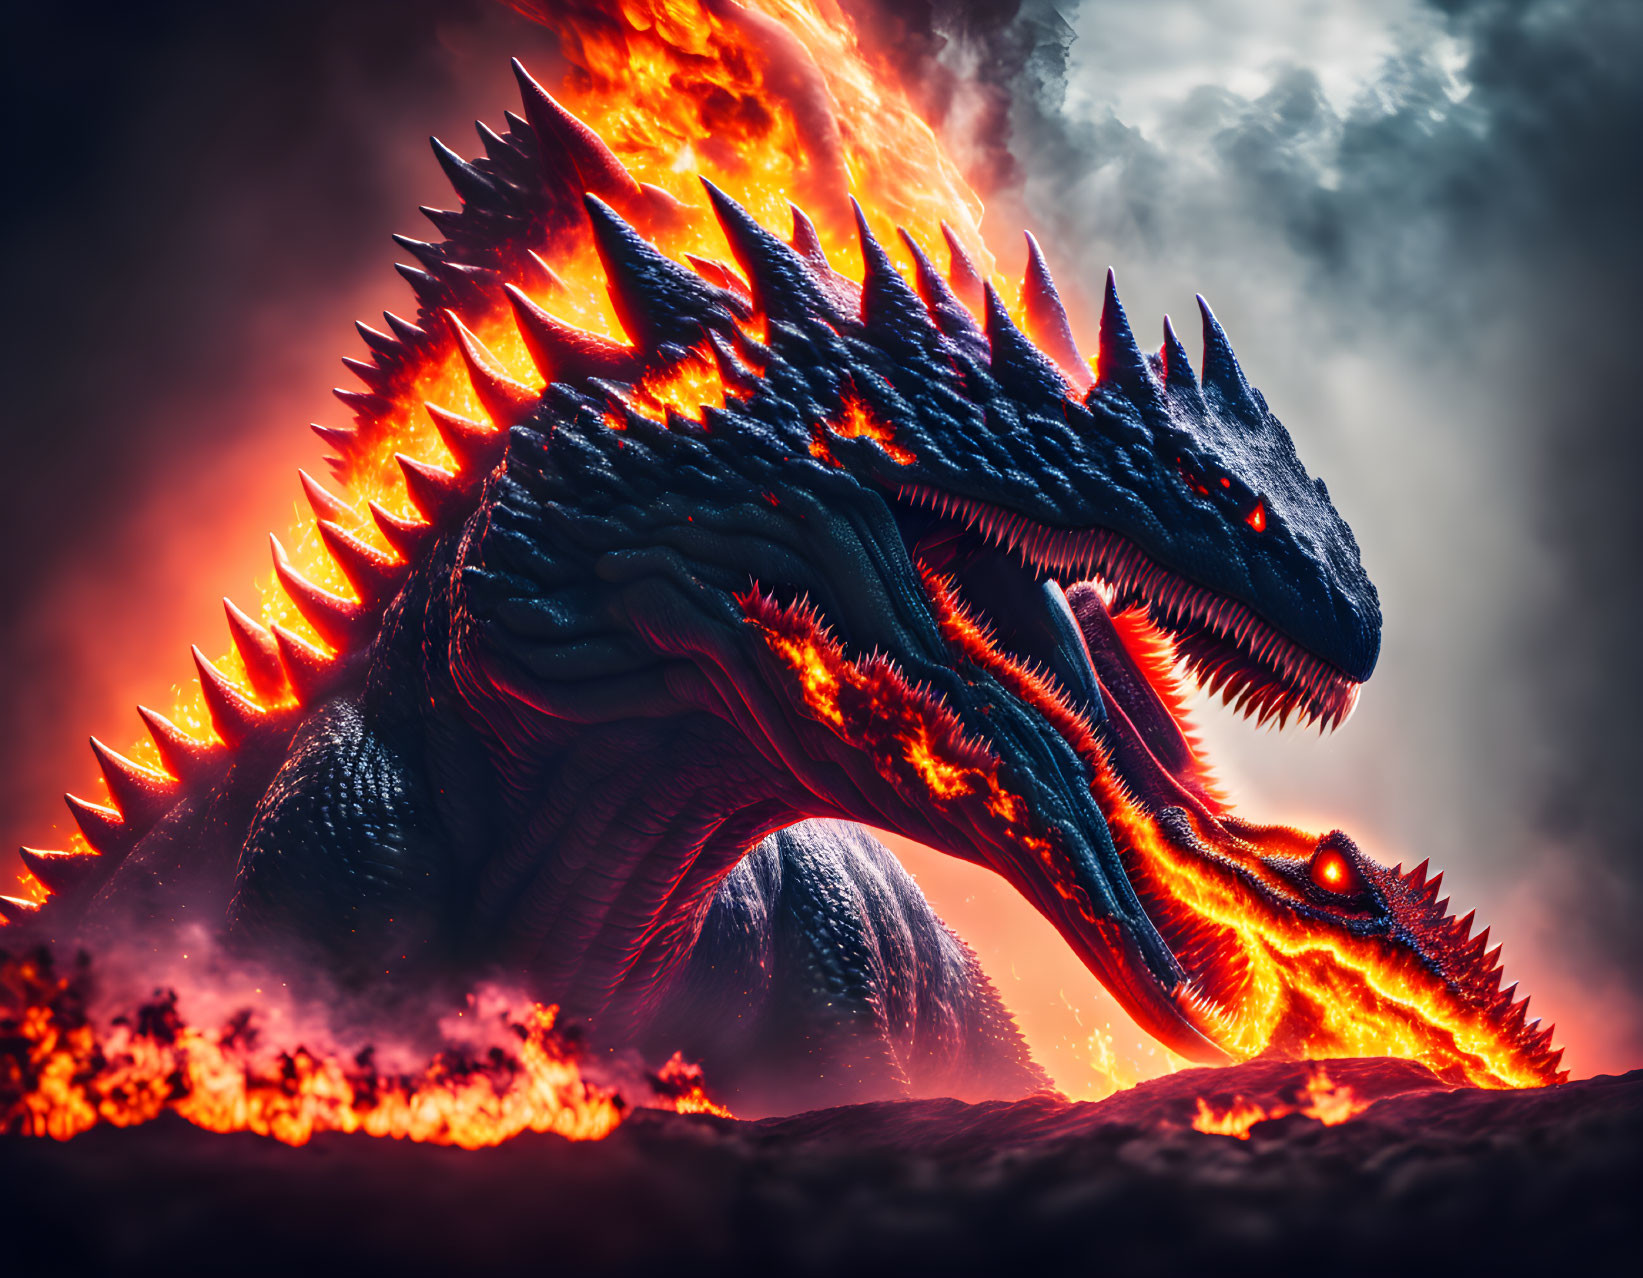 Glowing red-spined dragon breathes fire in dark sky